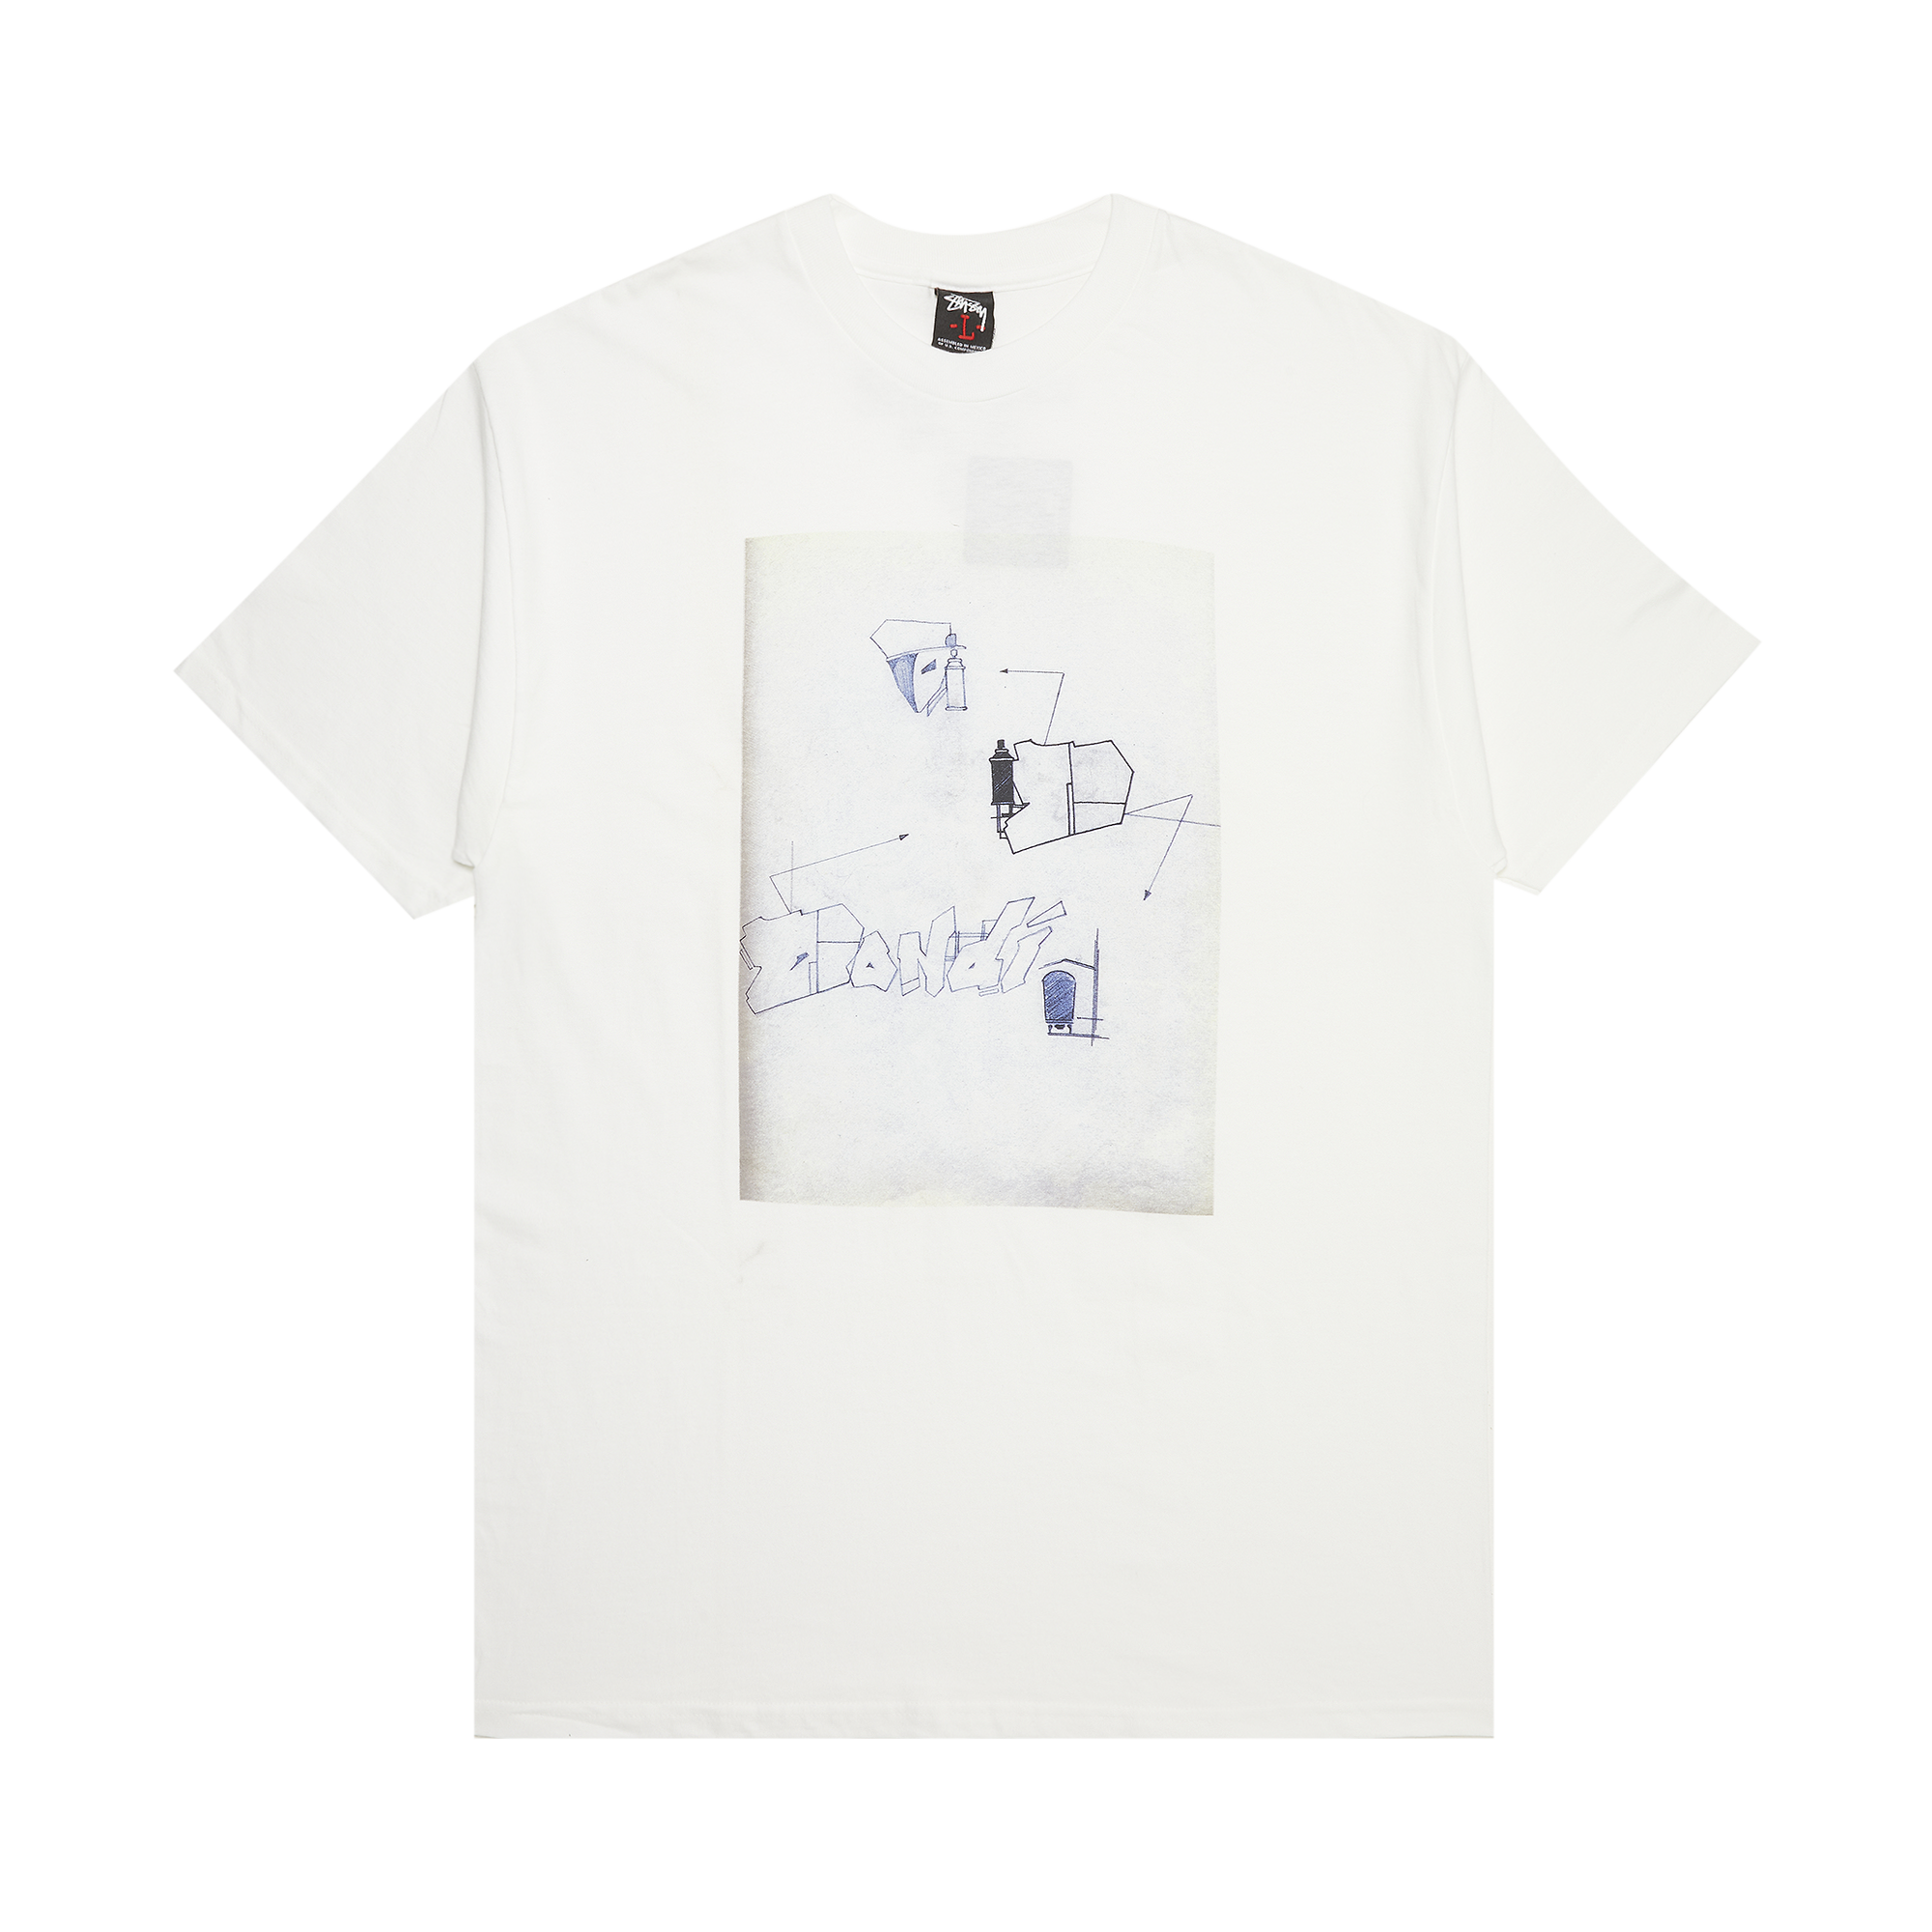 Pre-owned Stussy Gear Dondi Spray Face Tee 'white'